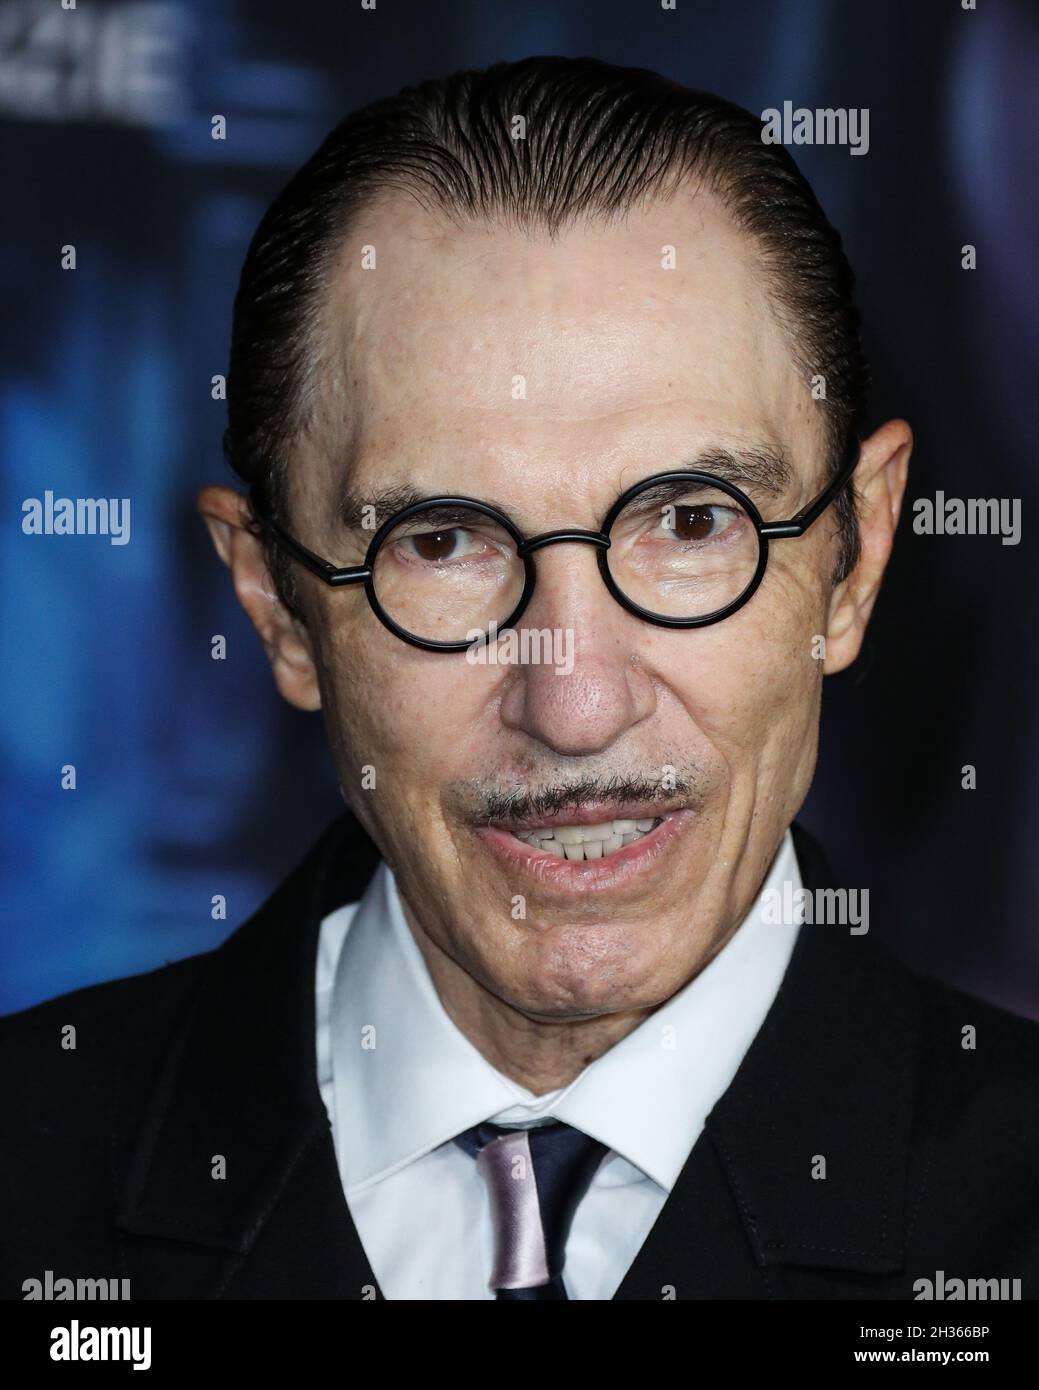 Los Angeles, United States. 25th Oct, 2021. LOS ANGELES, CALIFORNIA, USA - OCTOBER 25: Musician Ron Mael arrives at the Los Angeles Premiere Of Focus Features' 'Last Night In Soho' held at the Academy Museum of Motion Pictures on October 25, 2021 in Los Angeles, California, United States. (Photo by Xavier Collin/Image Press Agency/Sipa USA) Credit: Sipa USA/Alamy Live News Stock Photo